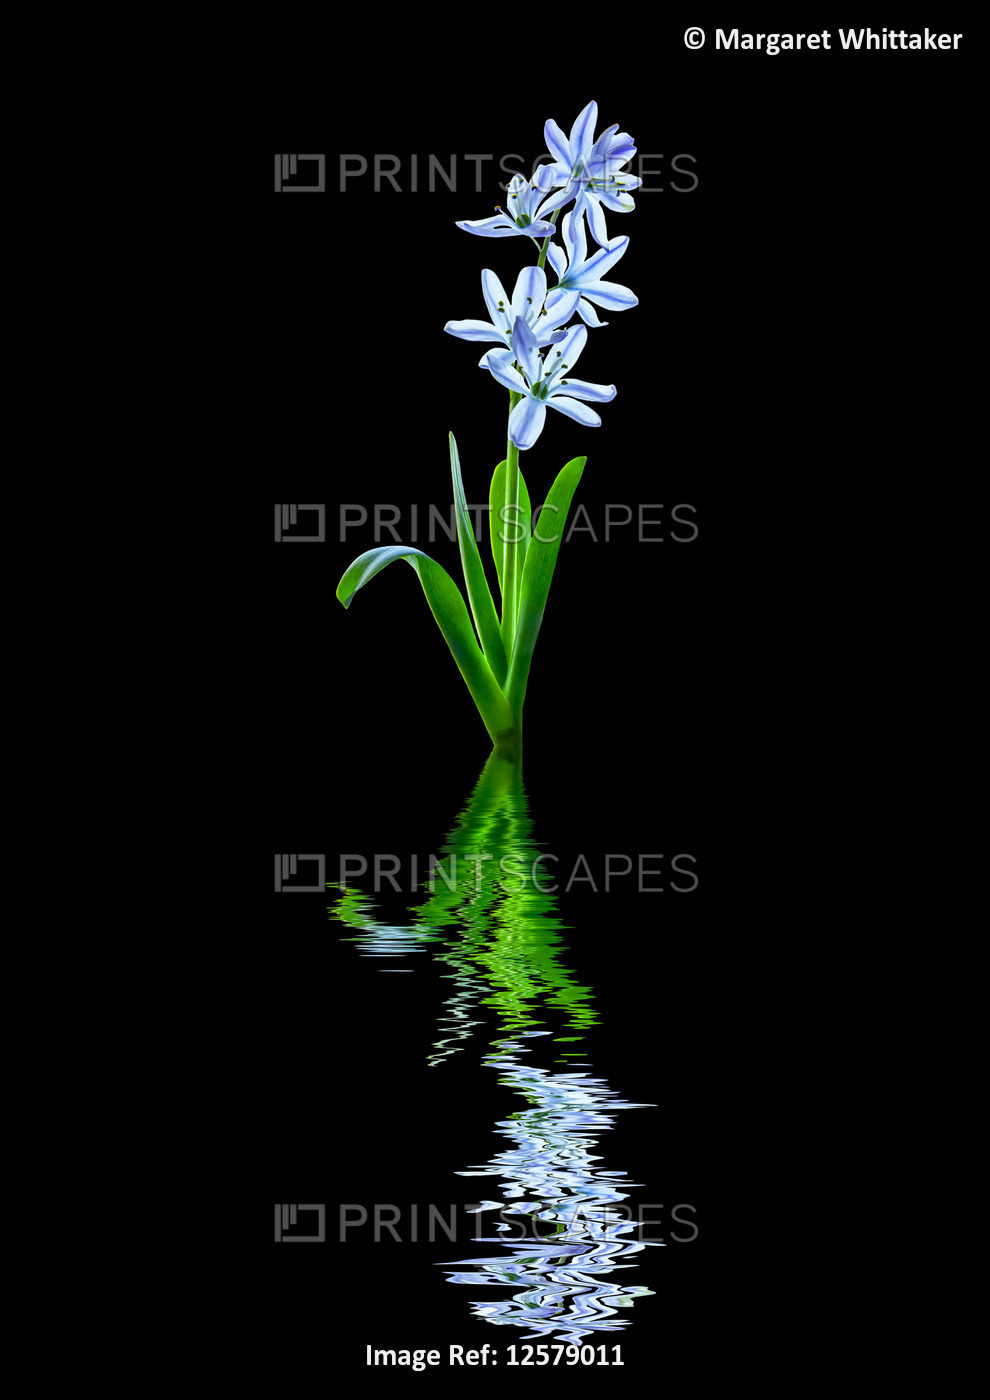 Art style image of white and purple tulip 'Rembrandt' reflected in water; Studio